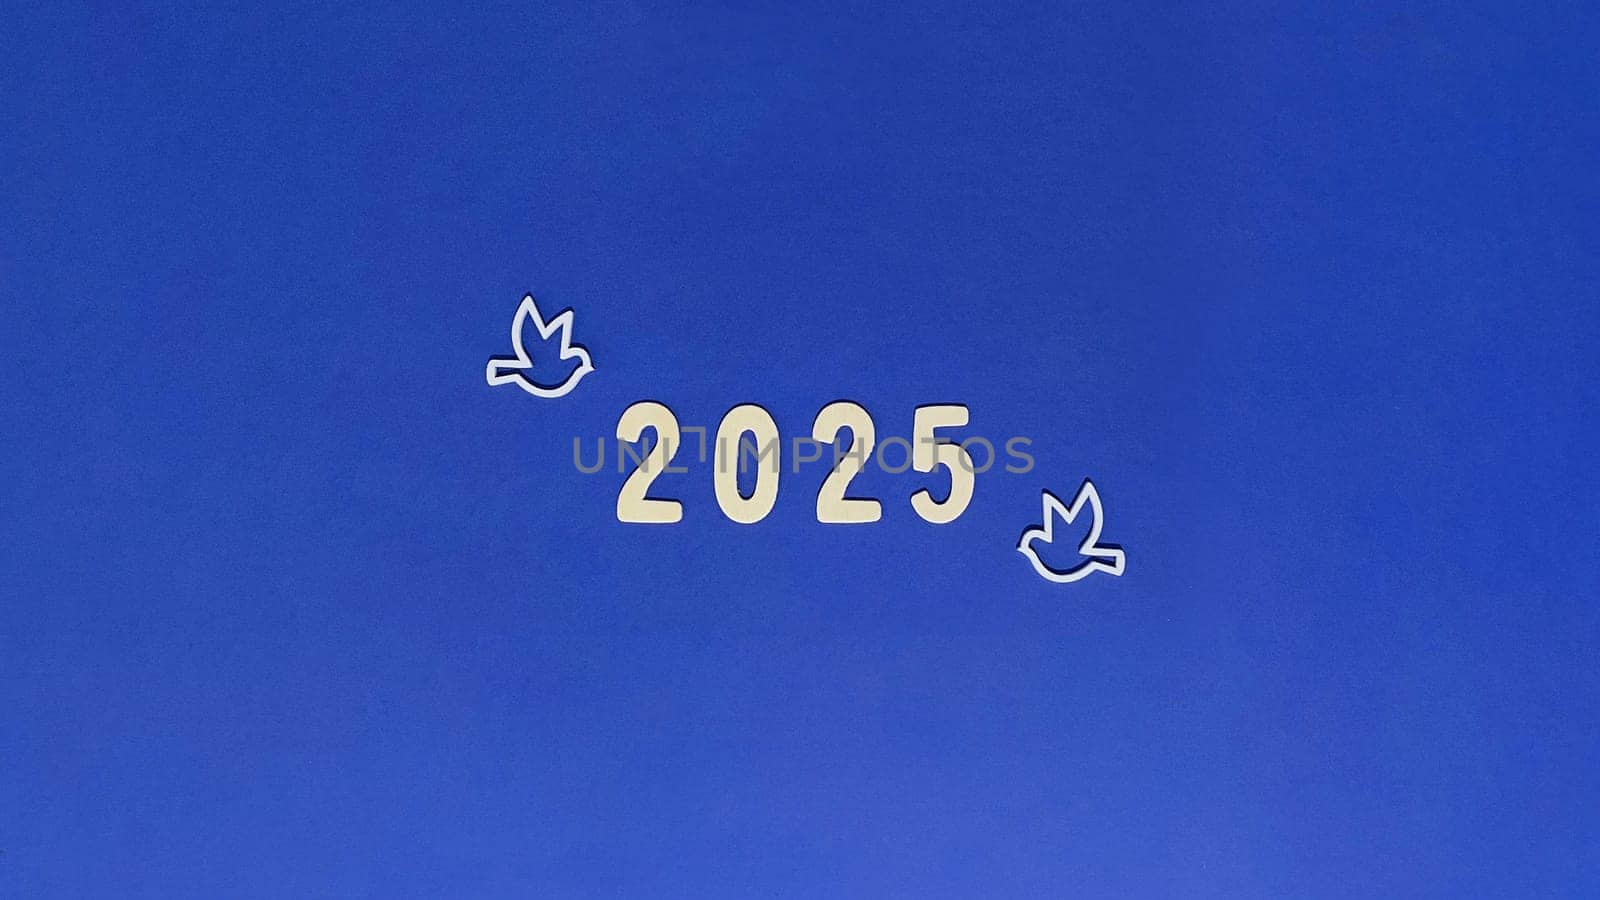 A blue rectangle with the number 2025, three birds flying in the sky, on an electric blue background. The design is modern and eyecatching, perfect for a brand logo